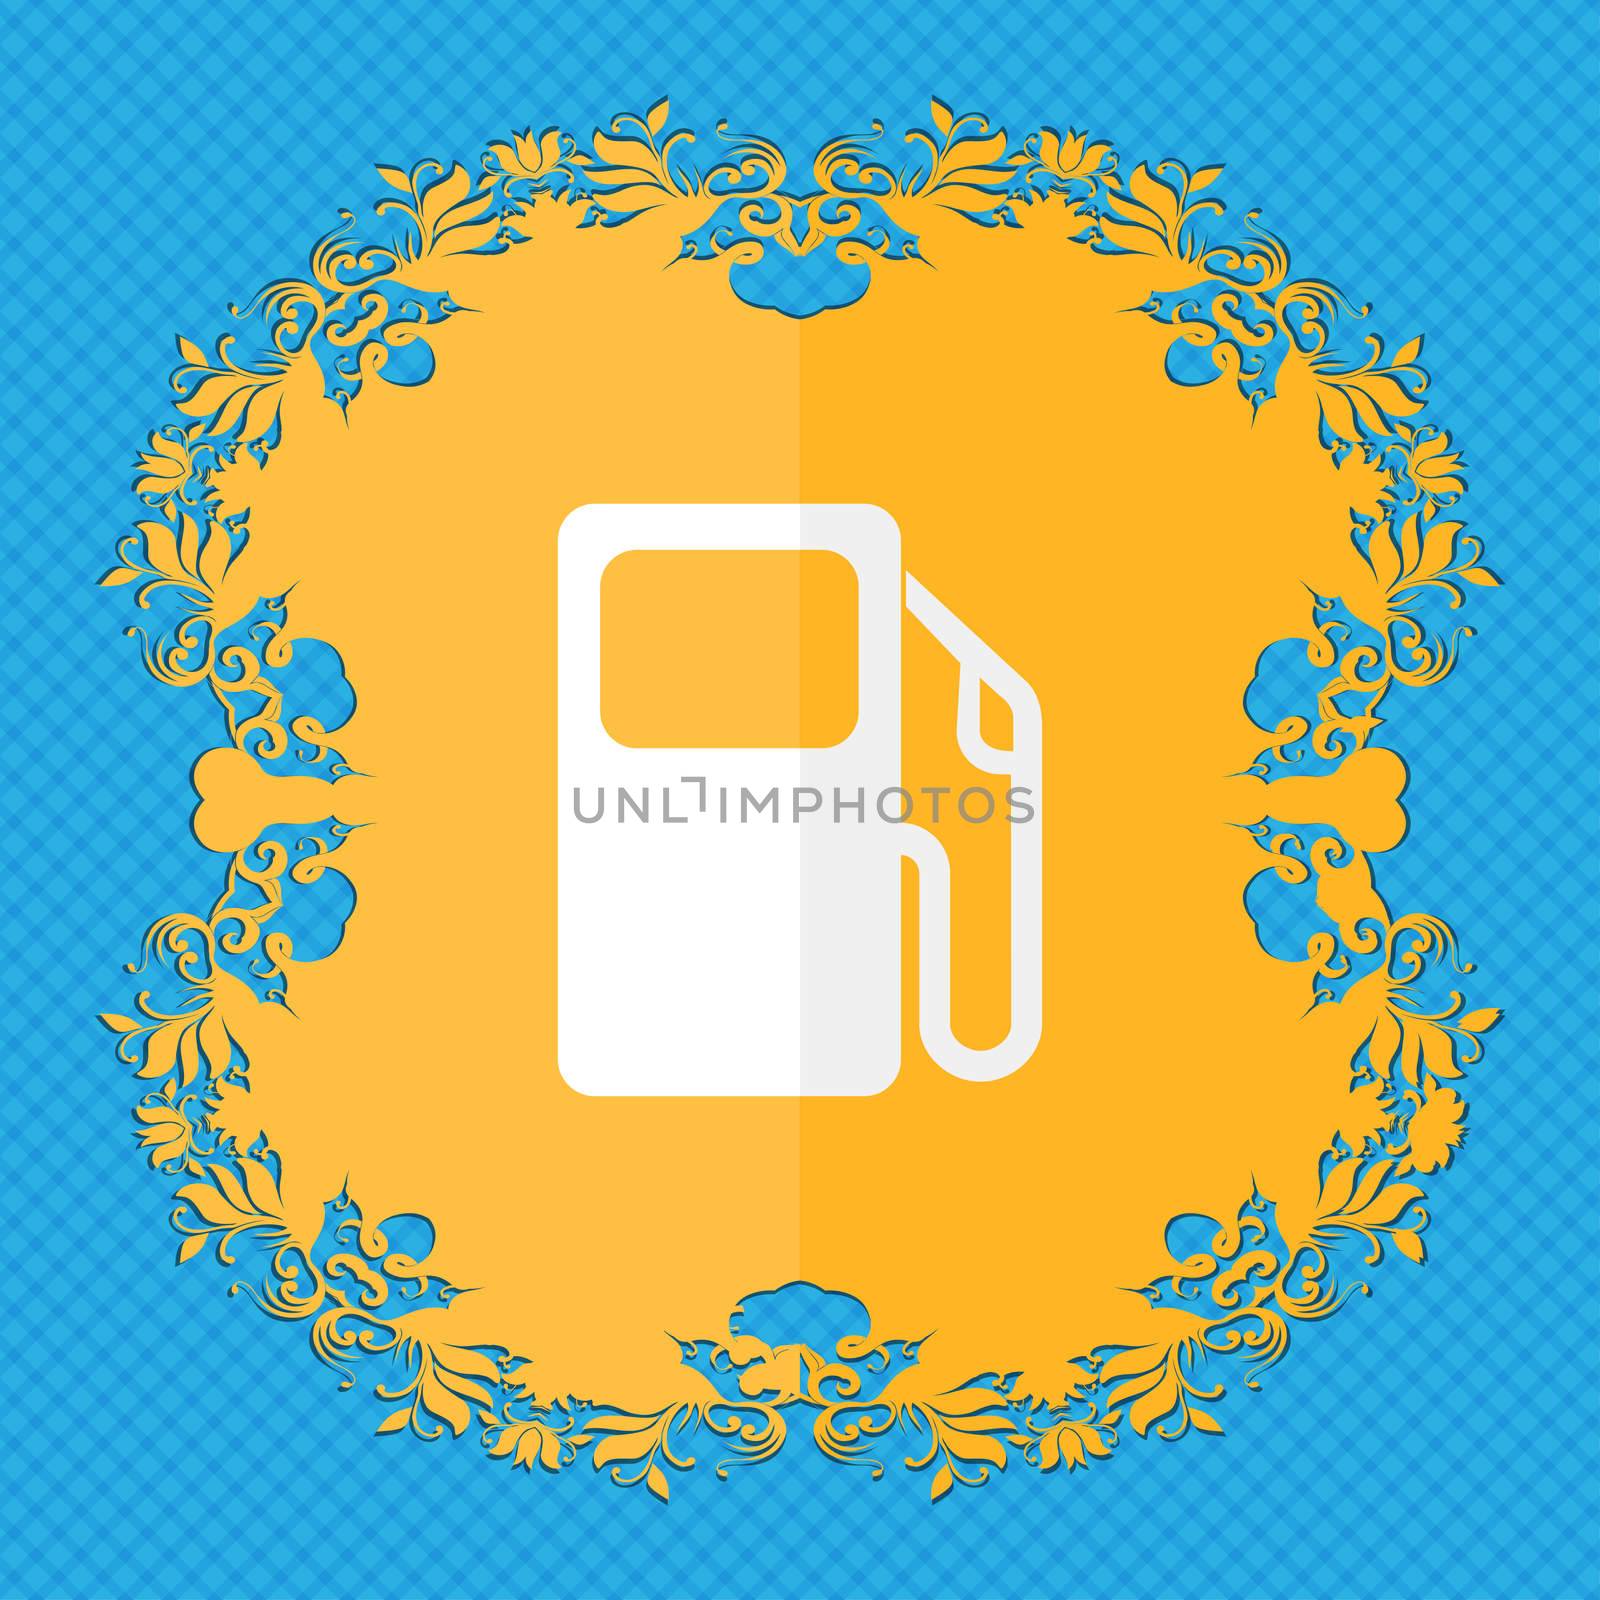 Auto gas station. Floral flat design on a blue abstract background with place for your text. illustration